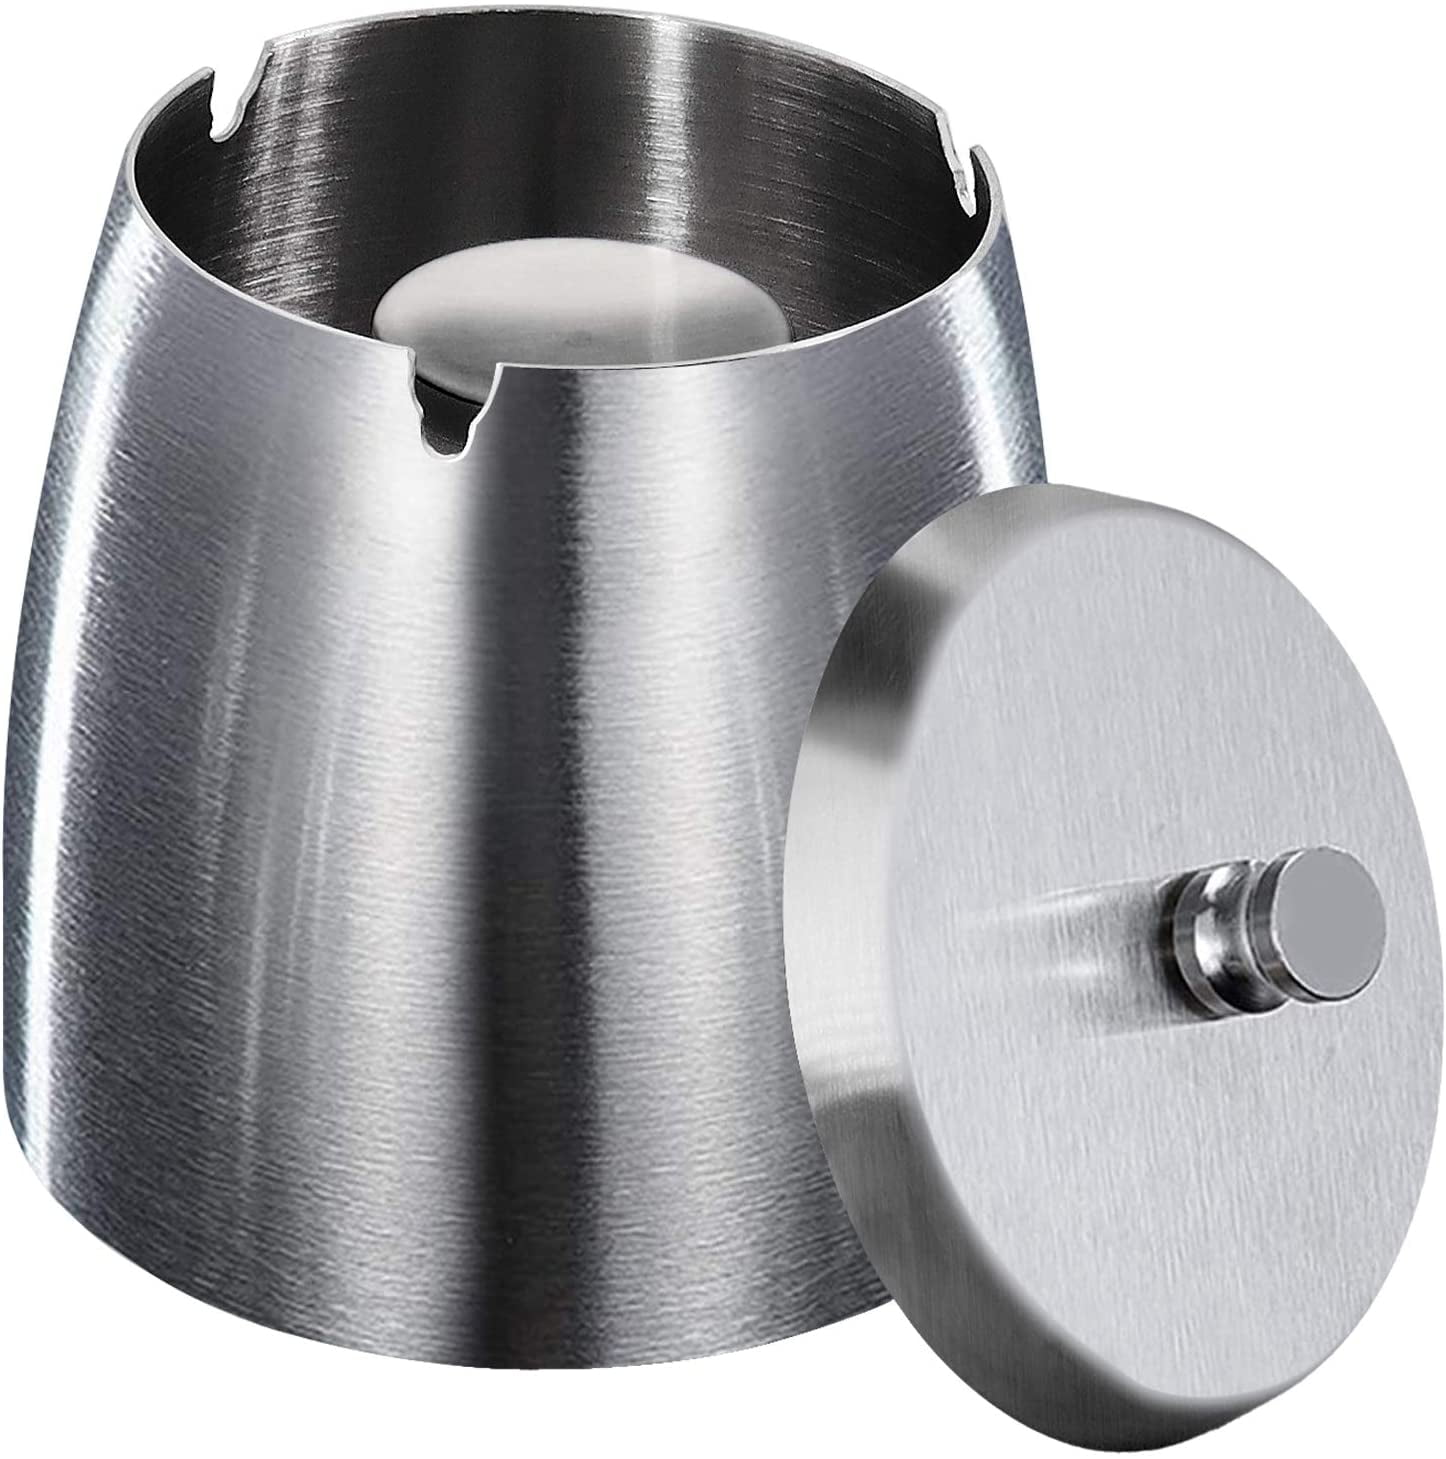 Windproof Ashtray Stainless Steel   Ashtray with Lid 